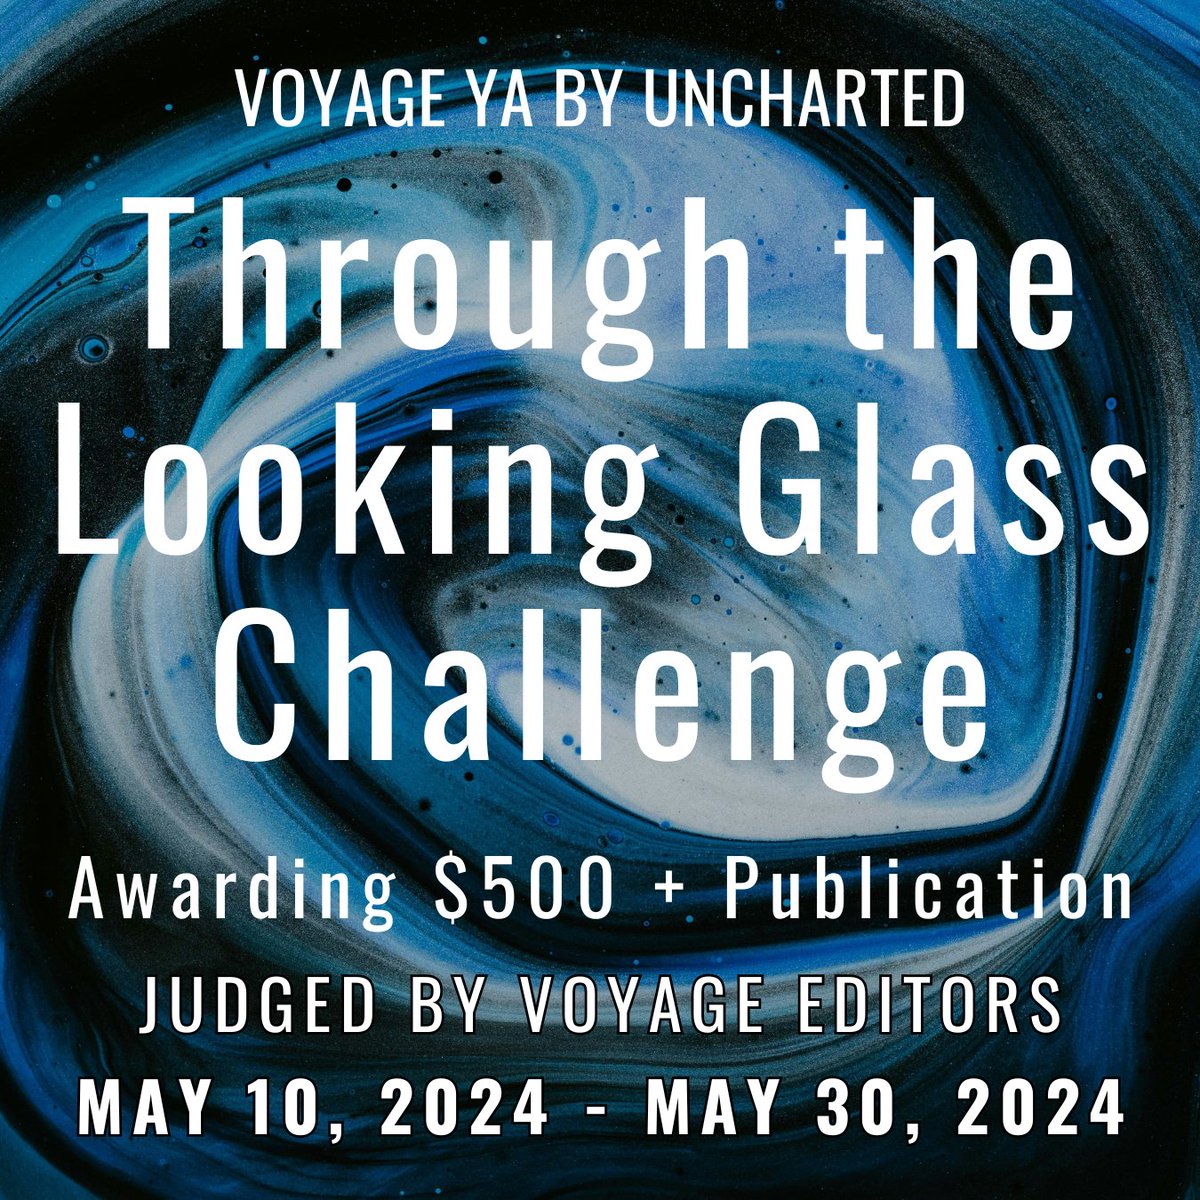 For this 20-day challenge Voyage YA by Uncharted is looking for young adult fiction that reinvents reality. One winner will be awarded $500 and publication. All entries will be considered for general publication. Learn more: unchartedmag.com/through-the-lo…